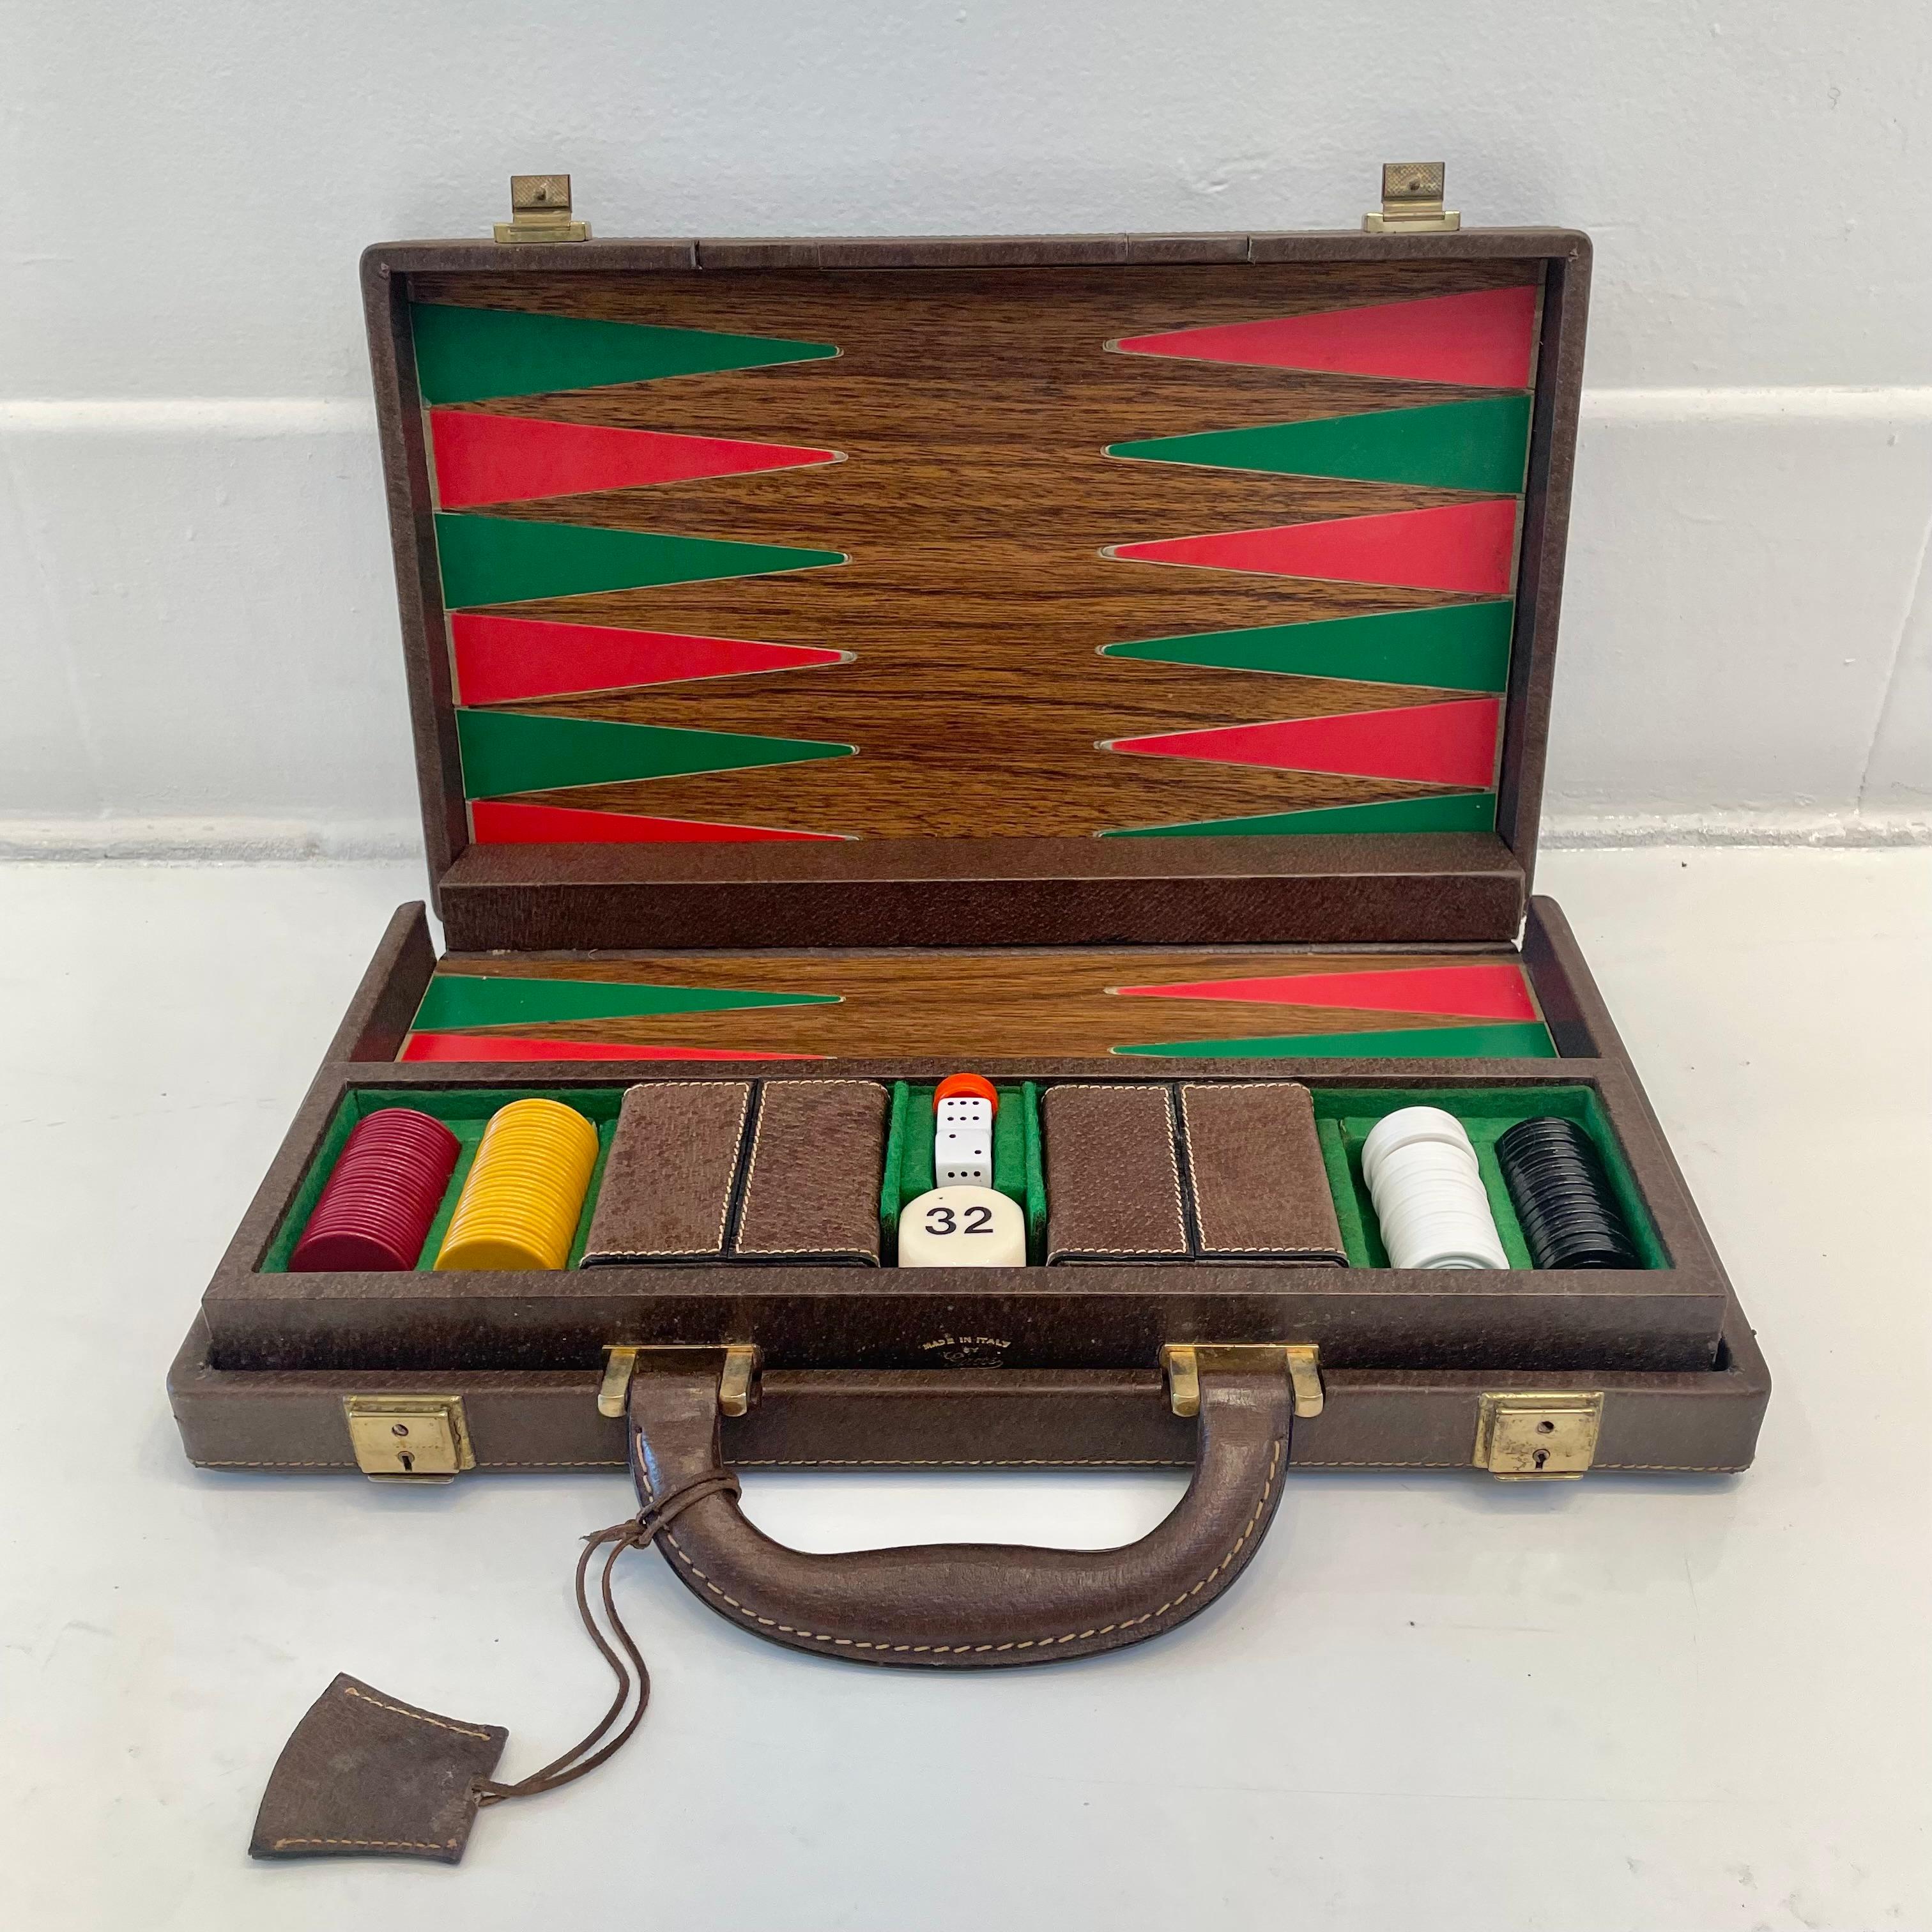 Vintage portable Gucci leather game case with backgammon and a small set of poker chips. Wood framed case wrapped in an elegant canvas with leather accents. Tan canvas features a classic pattern of the repeating and interlocking Gucci 